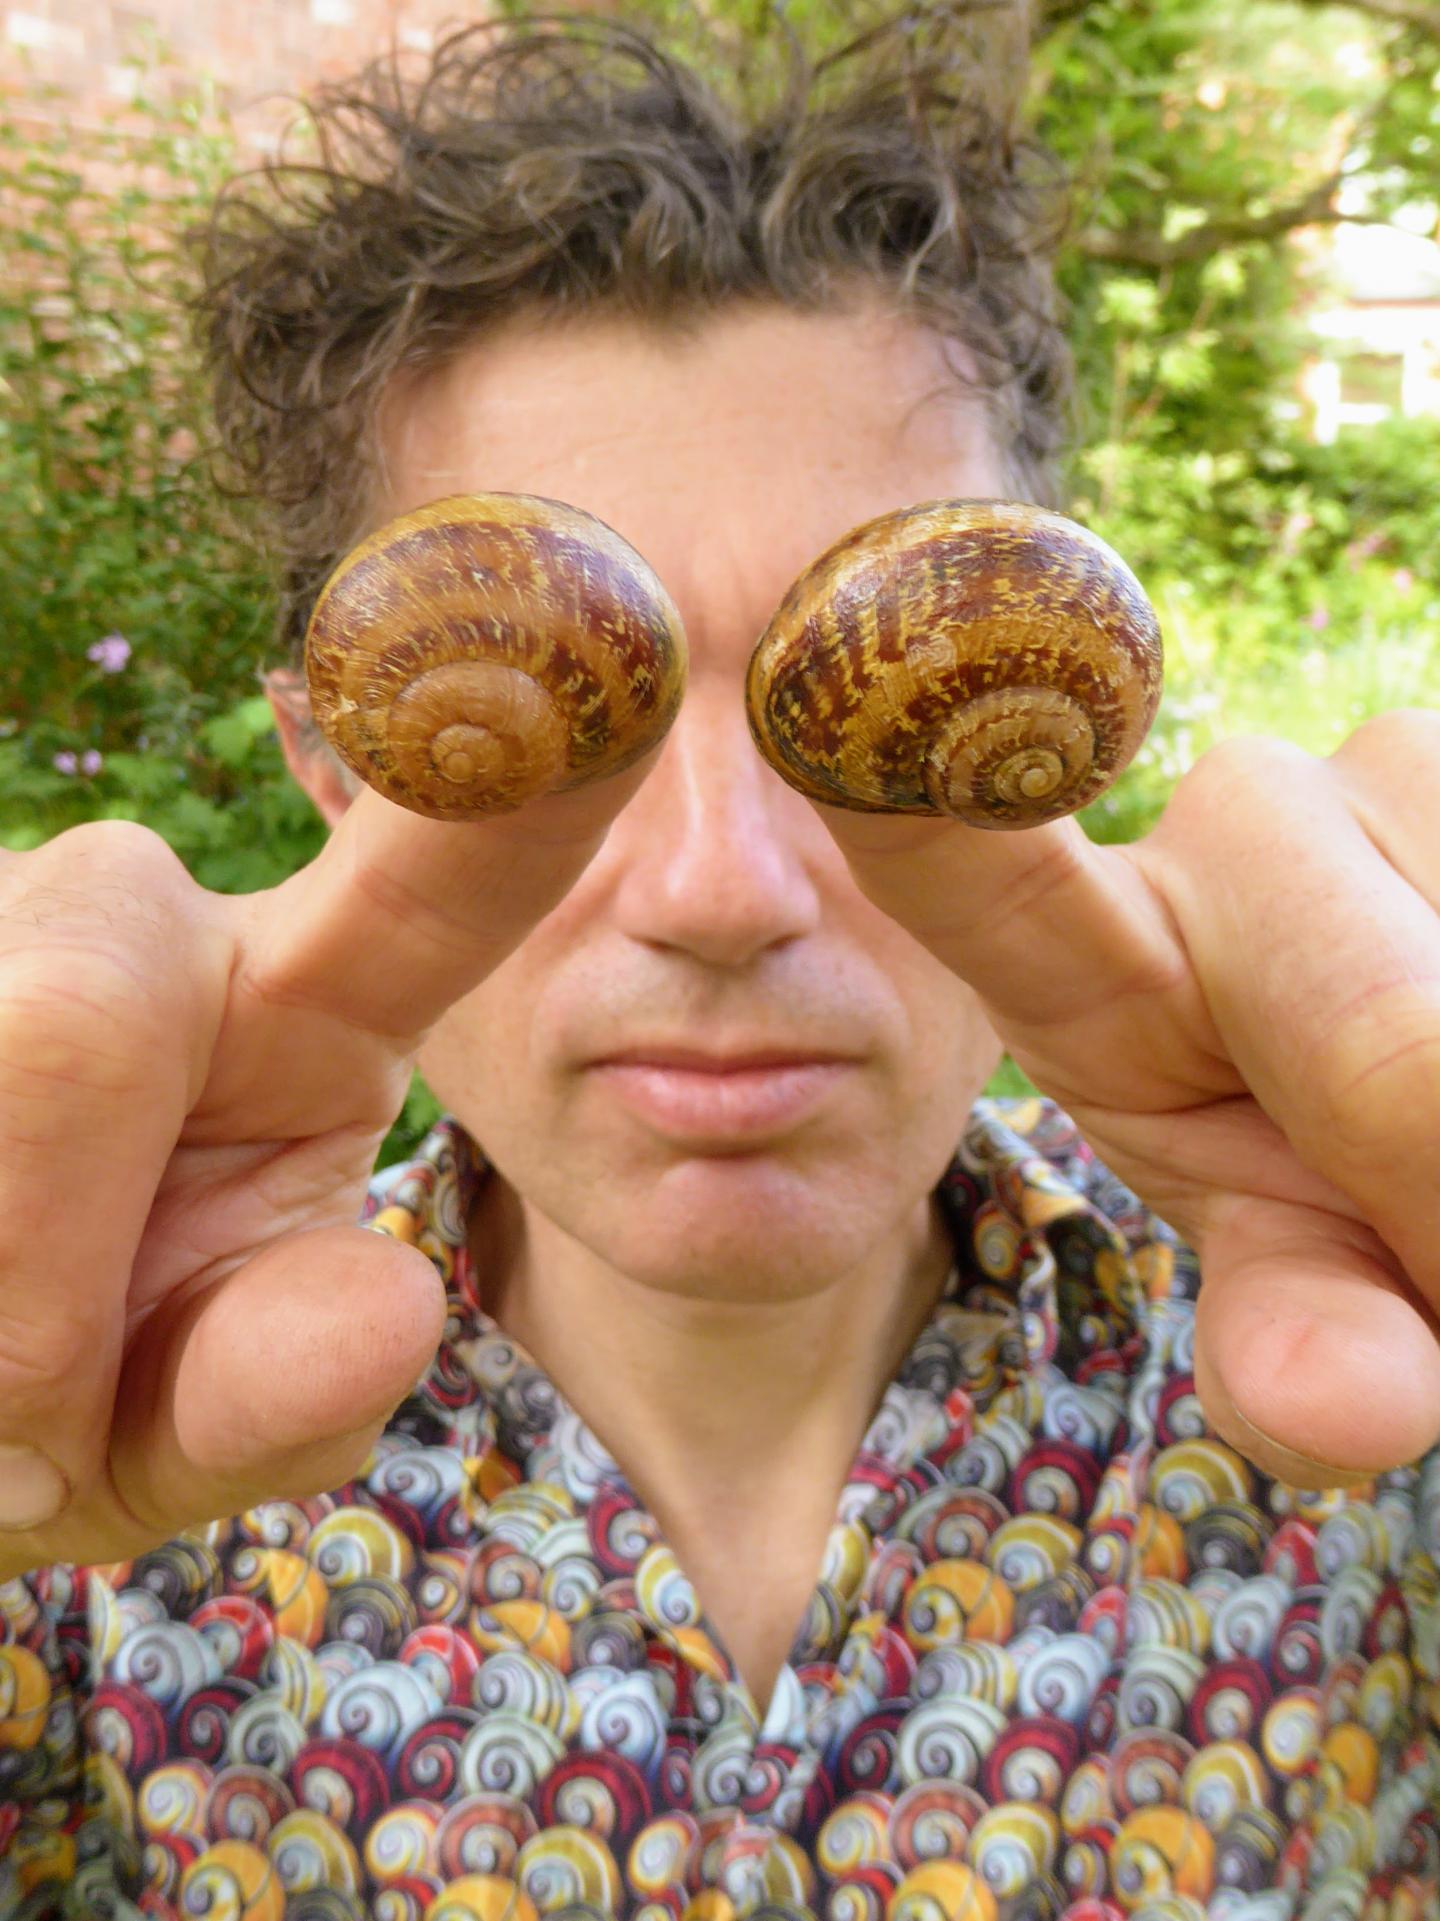 Angus with Snails